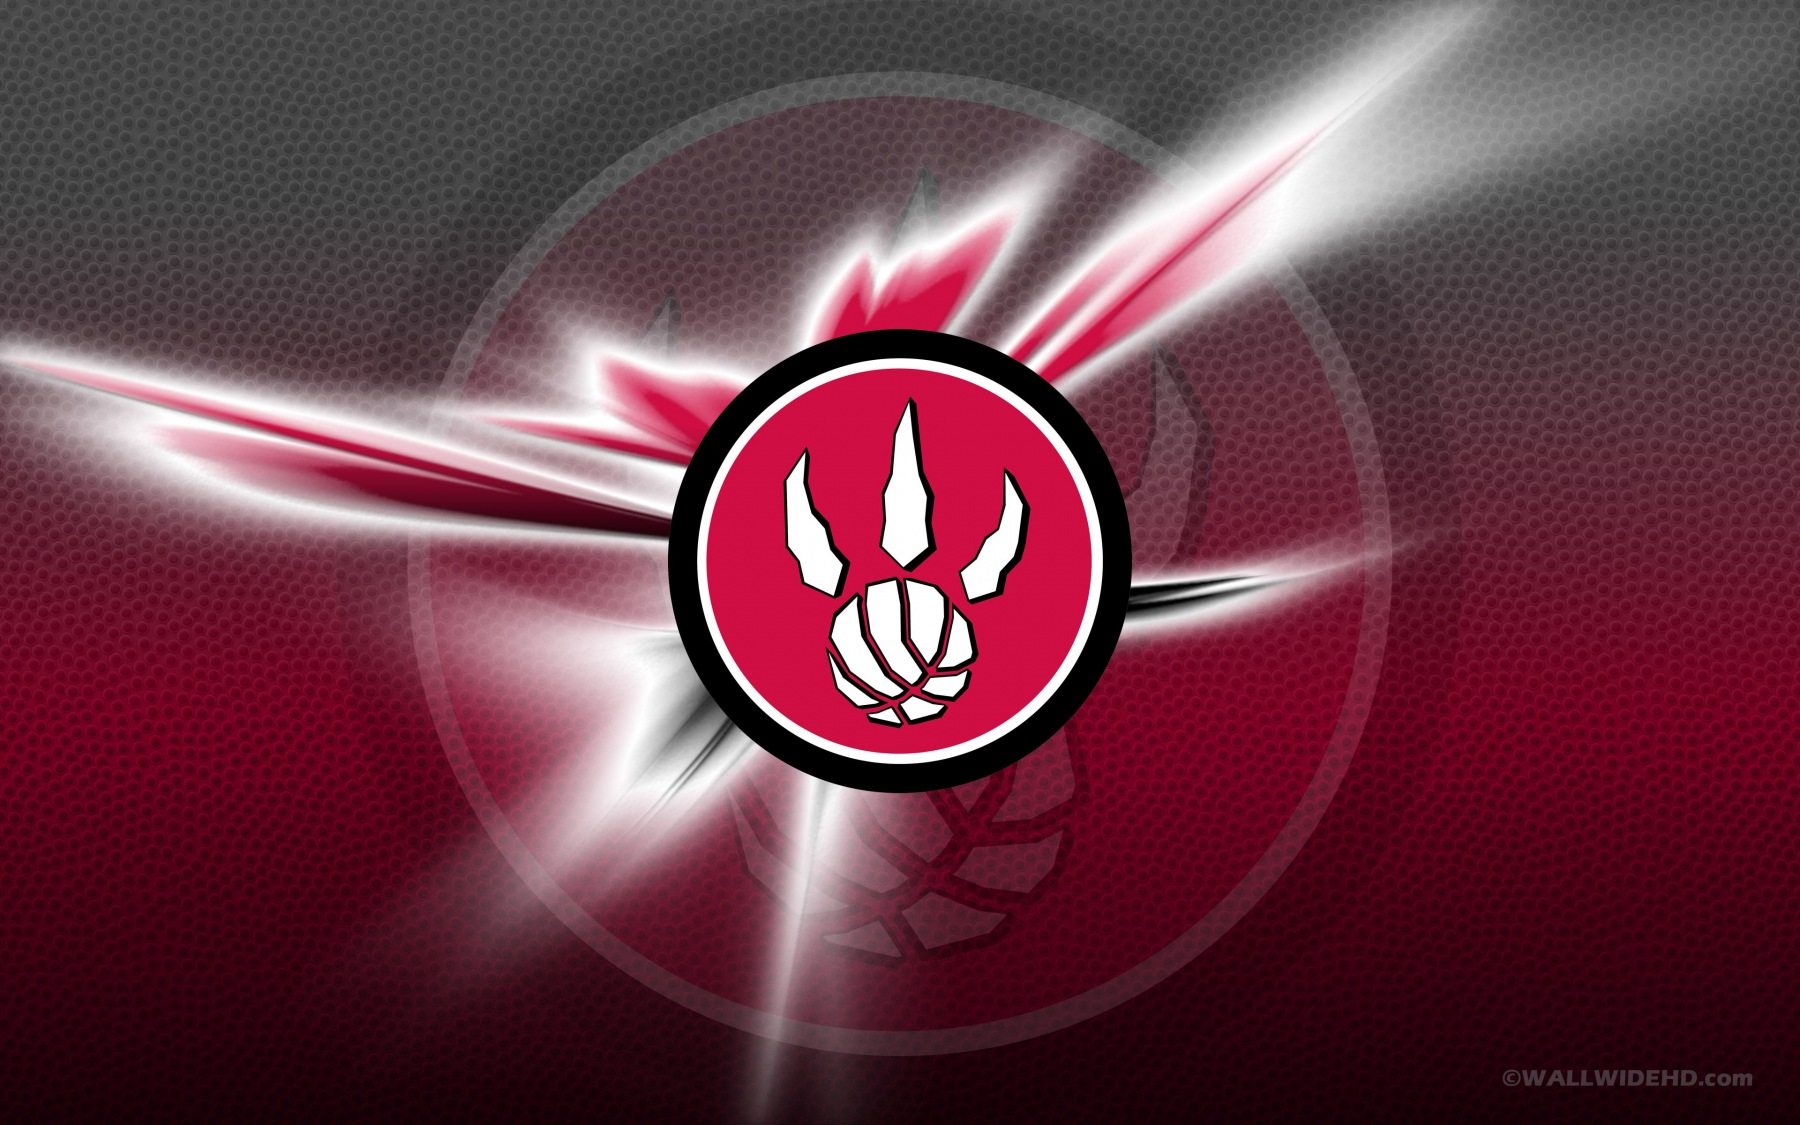 Twitter 上的Toronto RaptorsFresh wallpapers with a classic touch  WeTheNorth httpstcoAasy4e0jGC  X